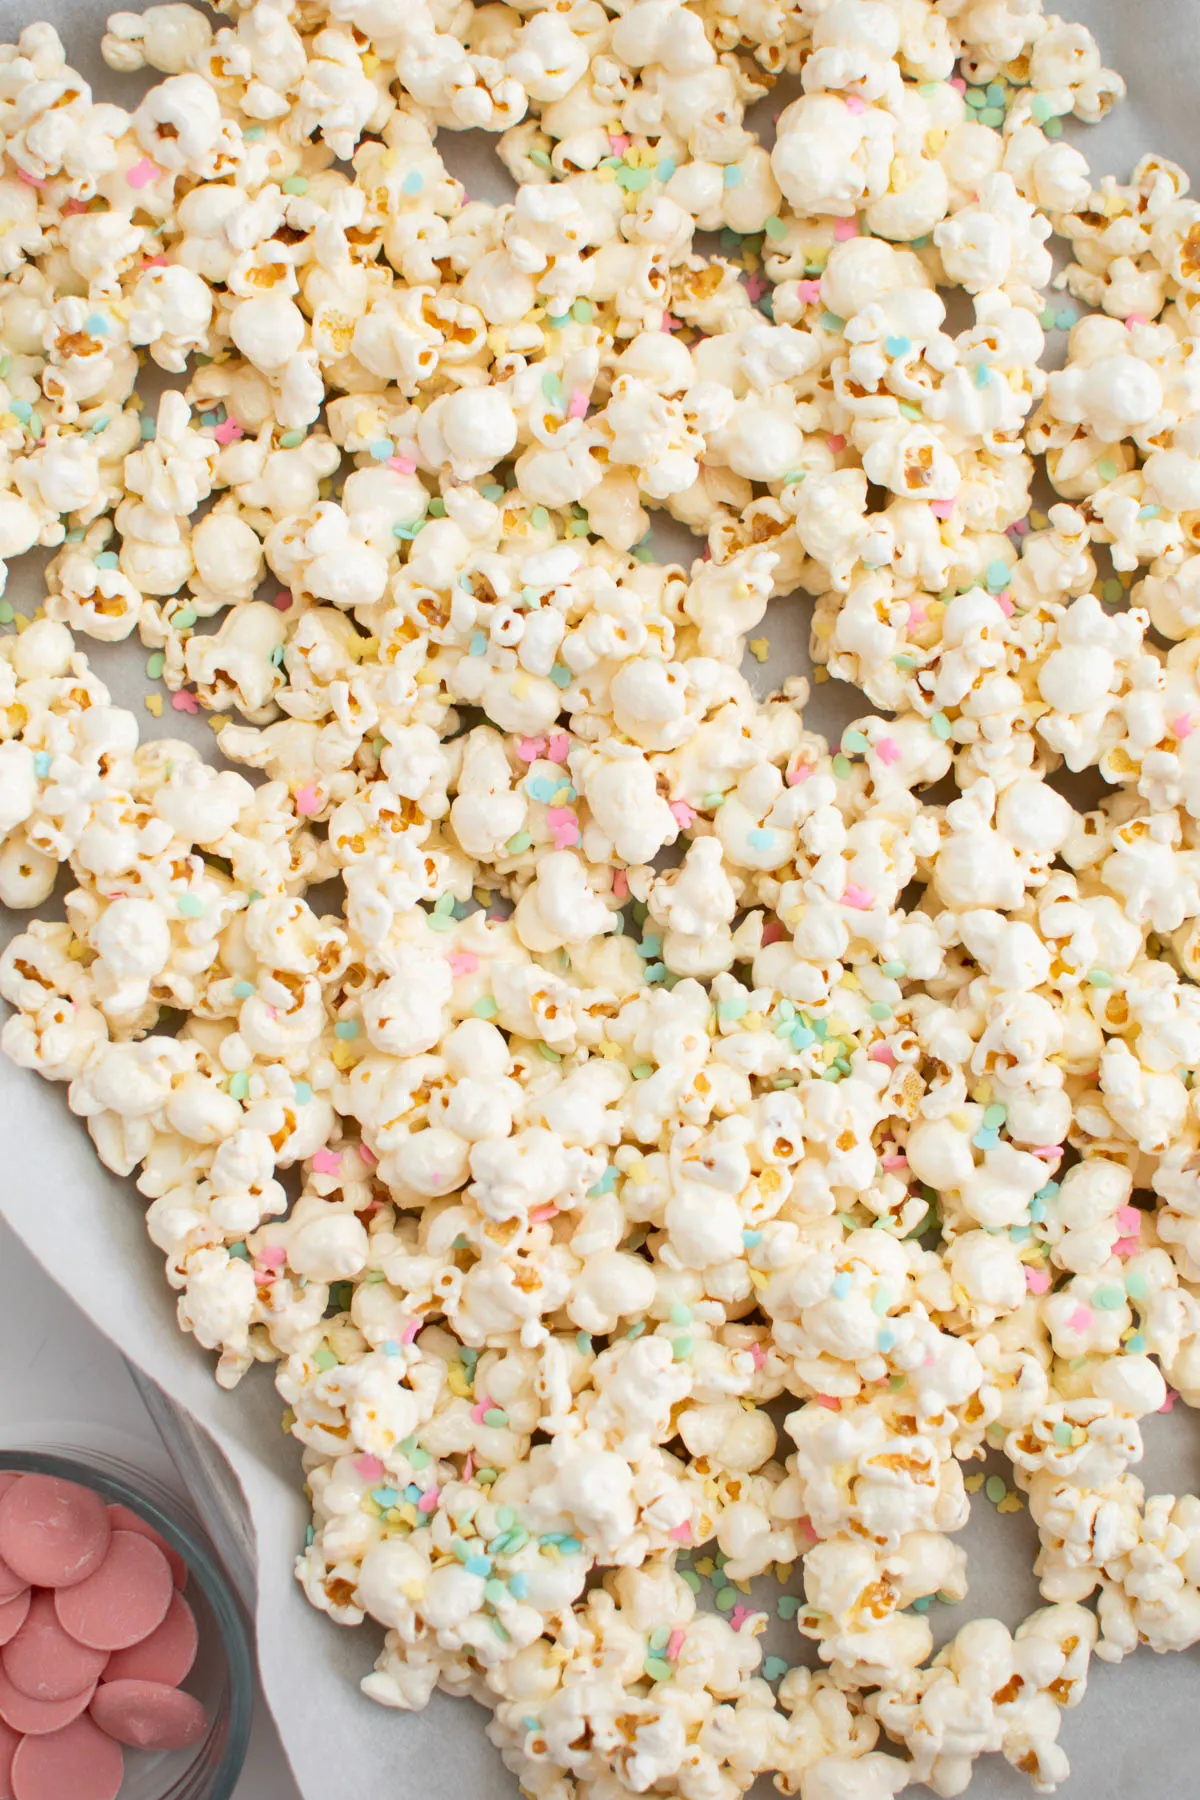 Marshmallow covered popcorn with Easter sprinkles.